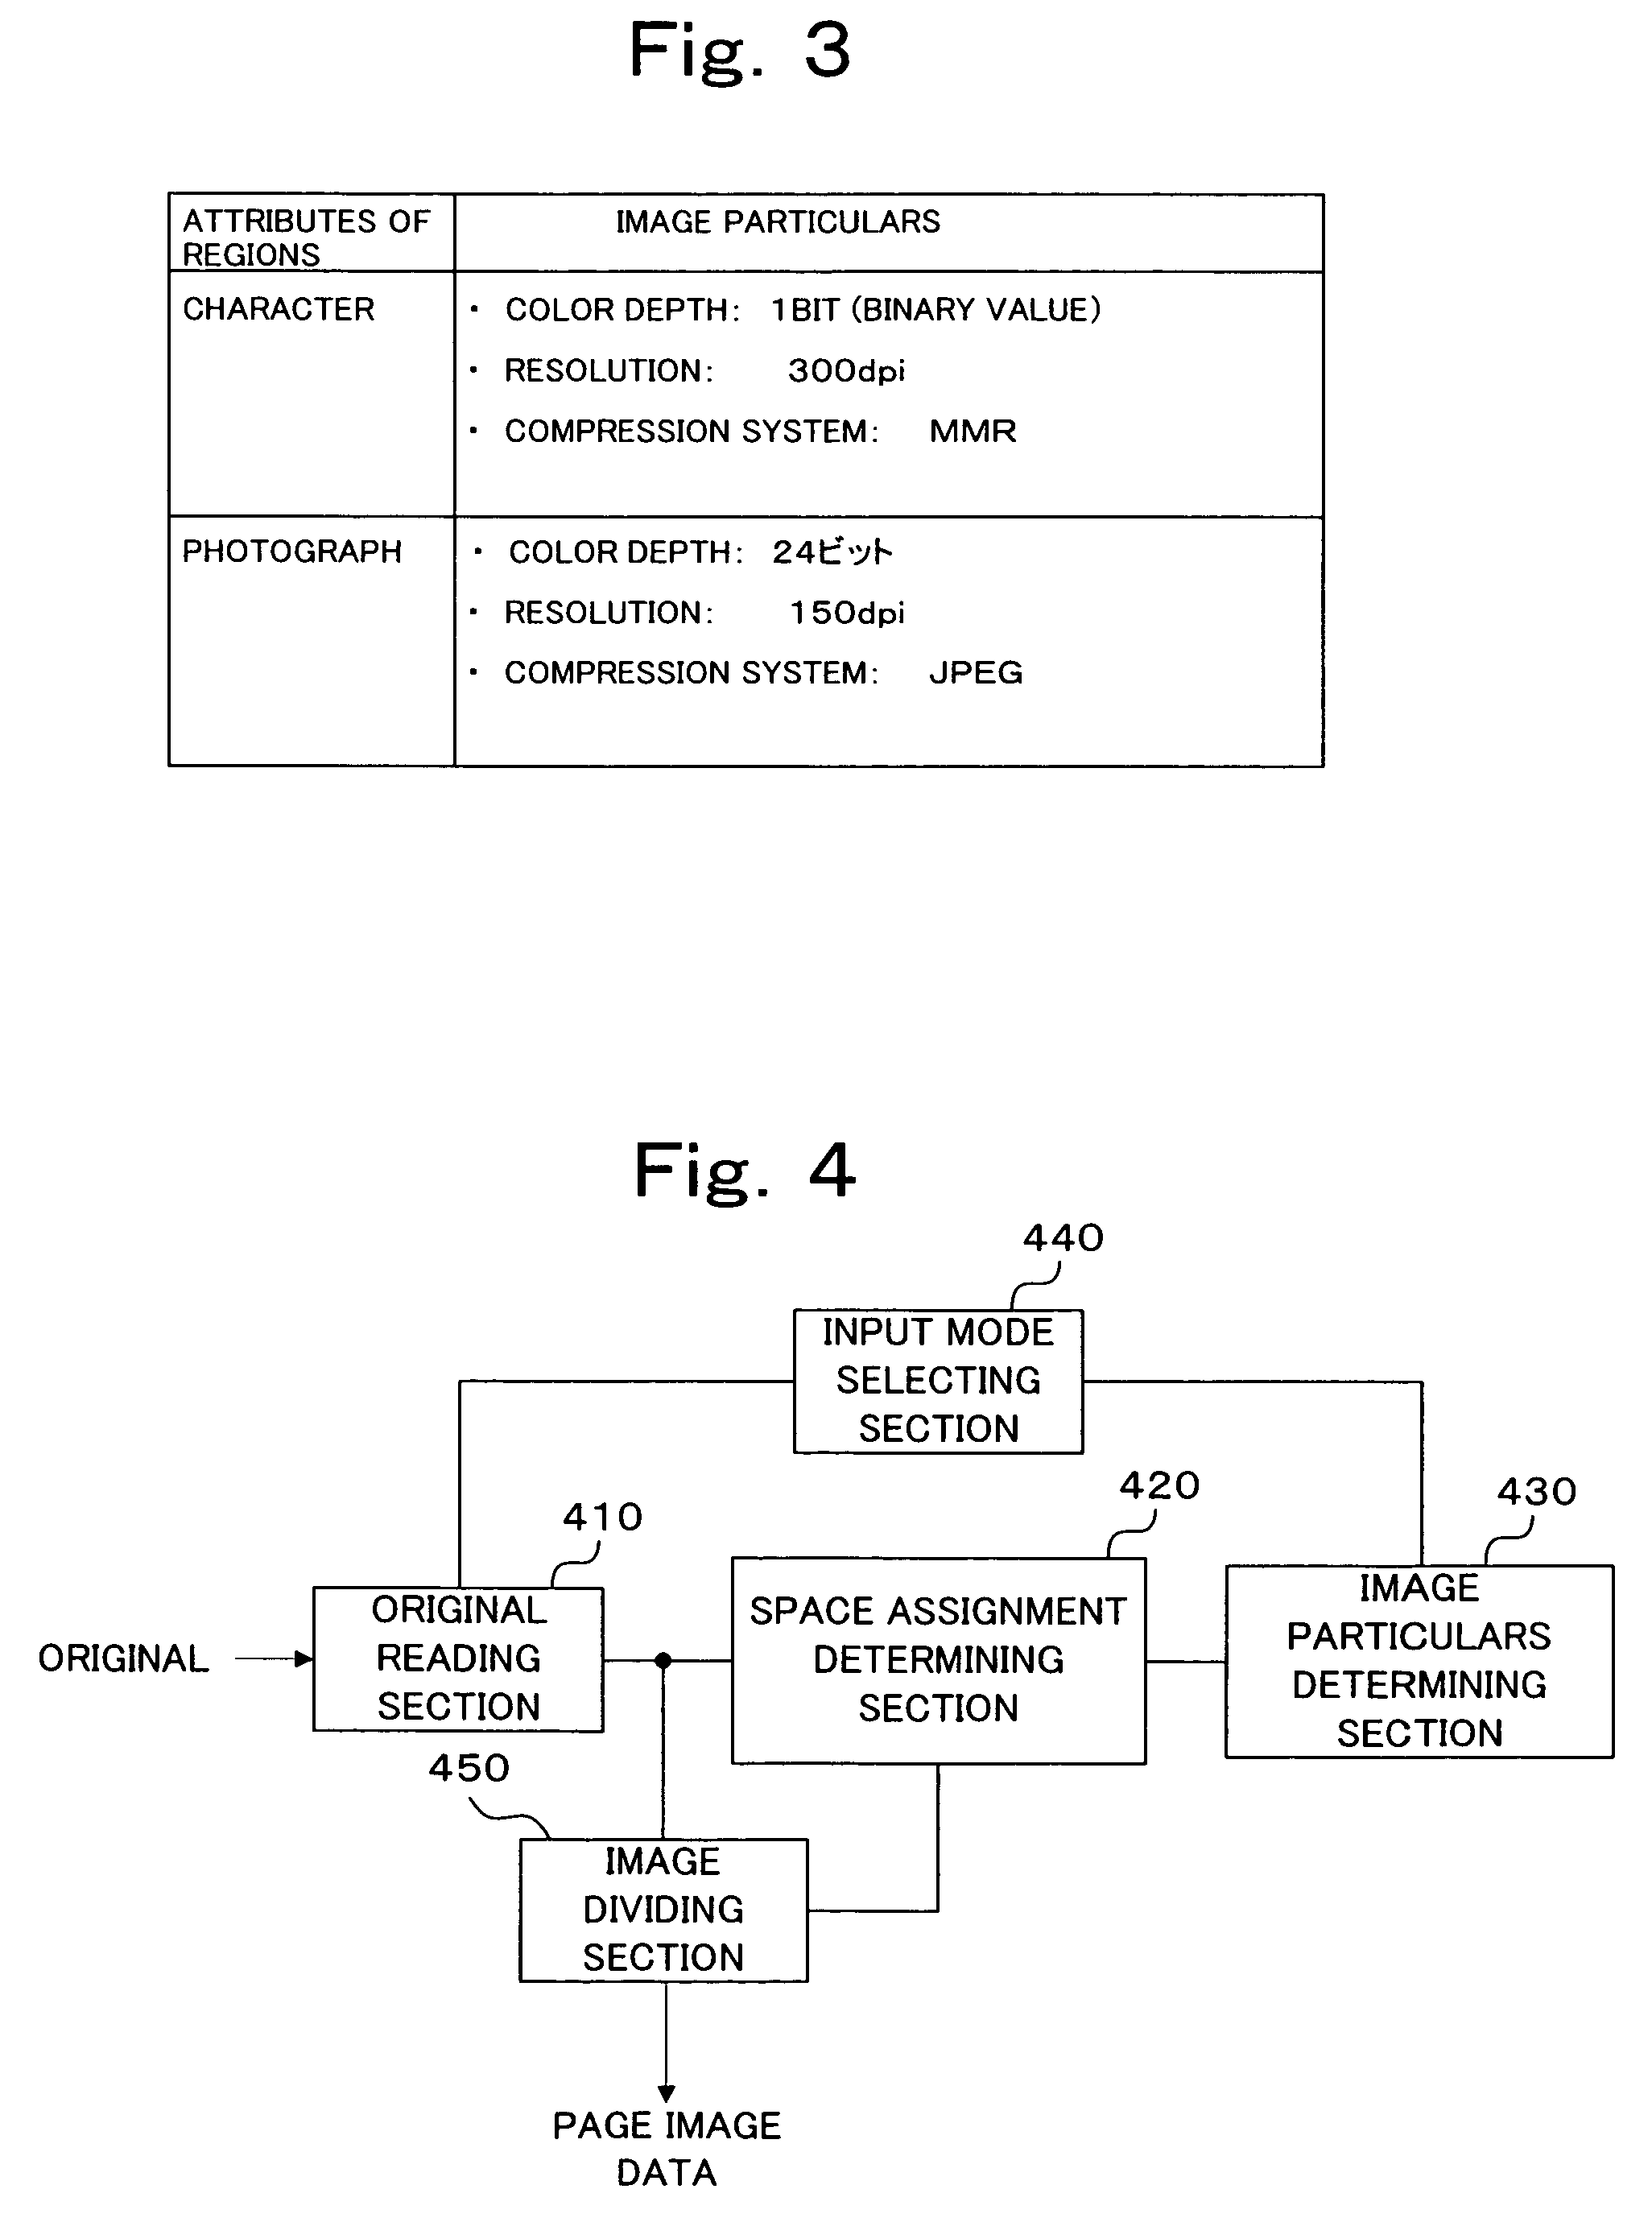 Image processing apparatus and method for dividing an image into component images